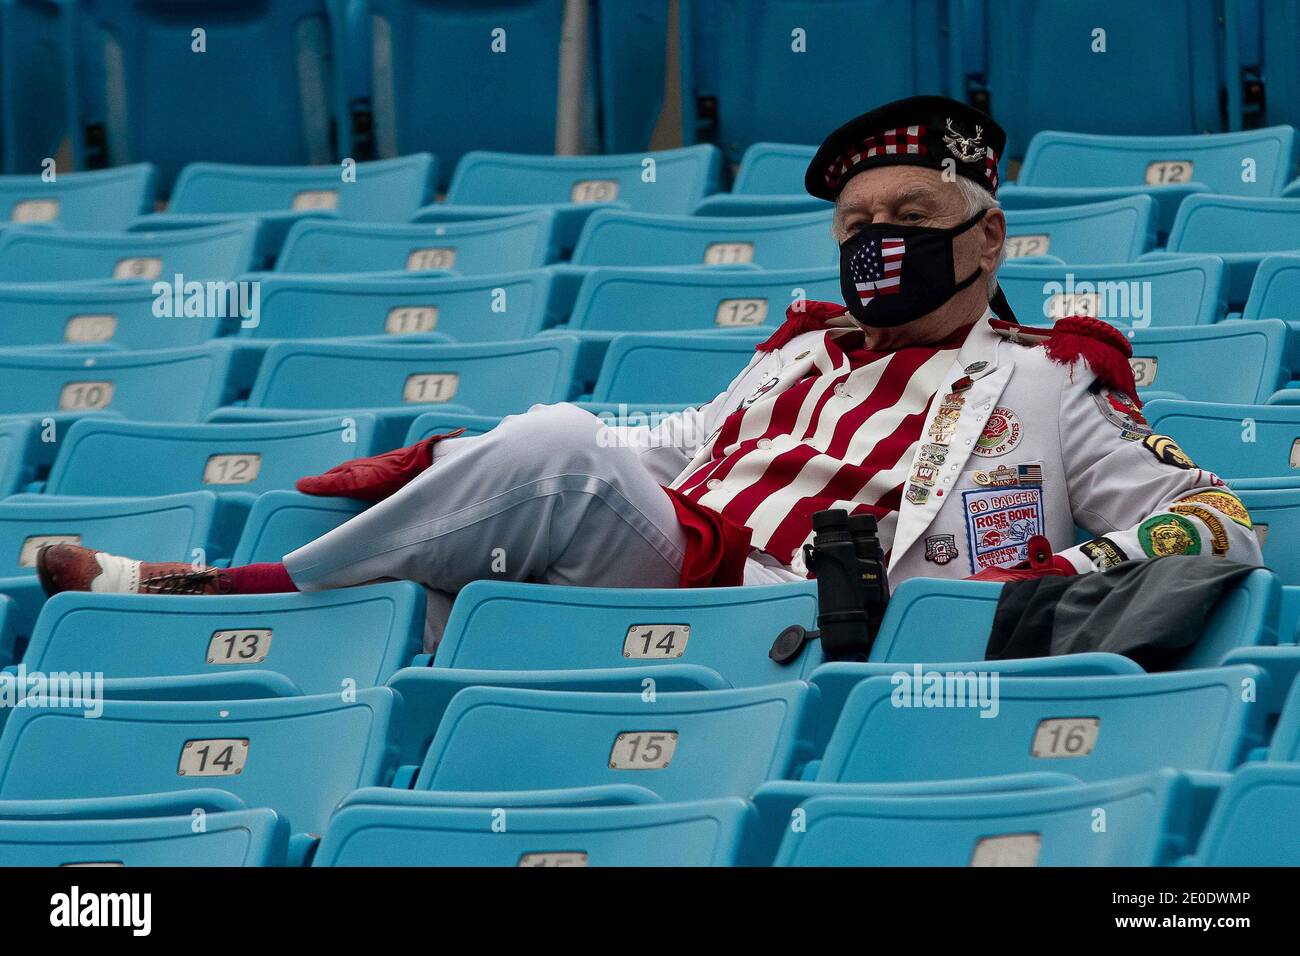 Charlottesville, VA, USA. 30th Dec, 2020. A Wisconsin superfine during the Duke's Mayo Bowl football game between the Wake Forest Demon Deacons and the Wisconsin Badgers at Bank of America Stadium in Charlottesville, VA. Brian McWalters/CSM/Alamy Live News Stock Photo